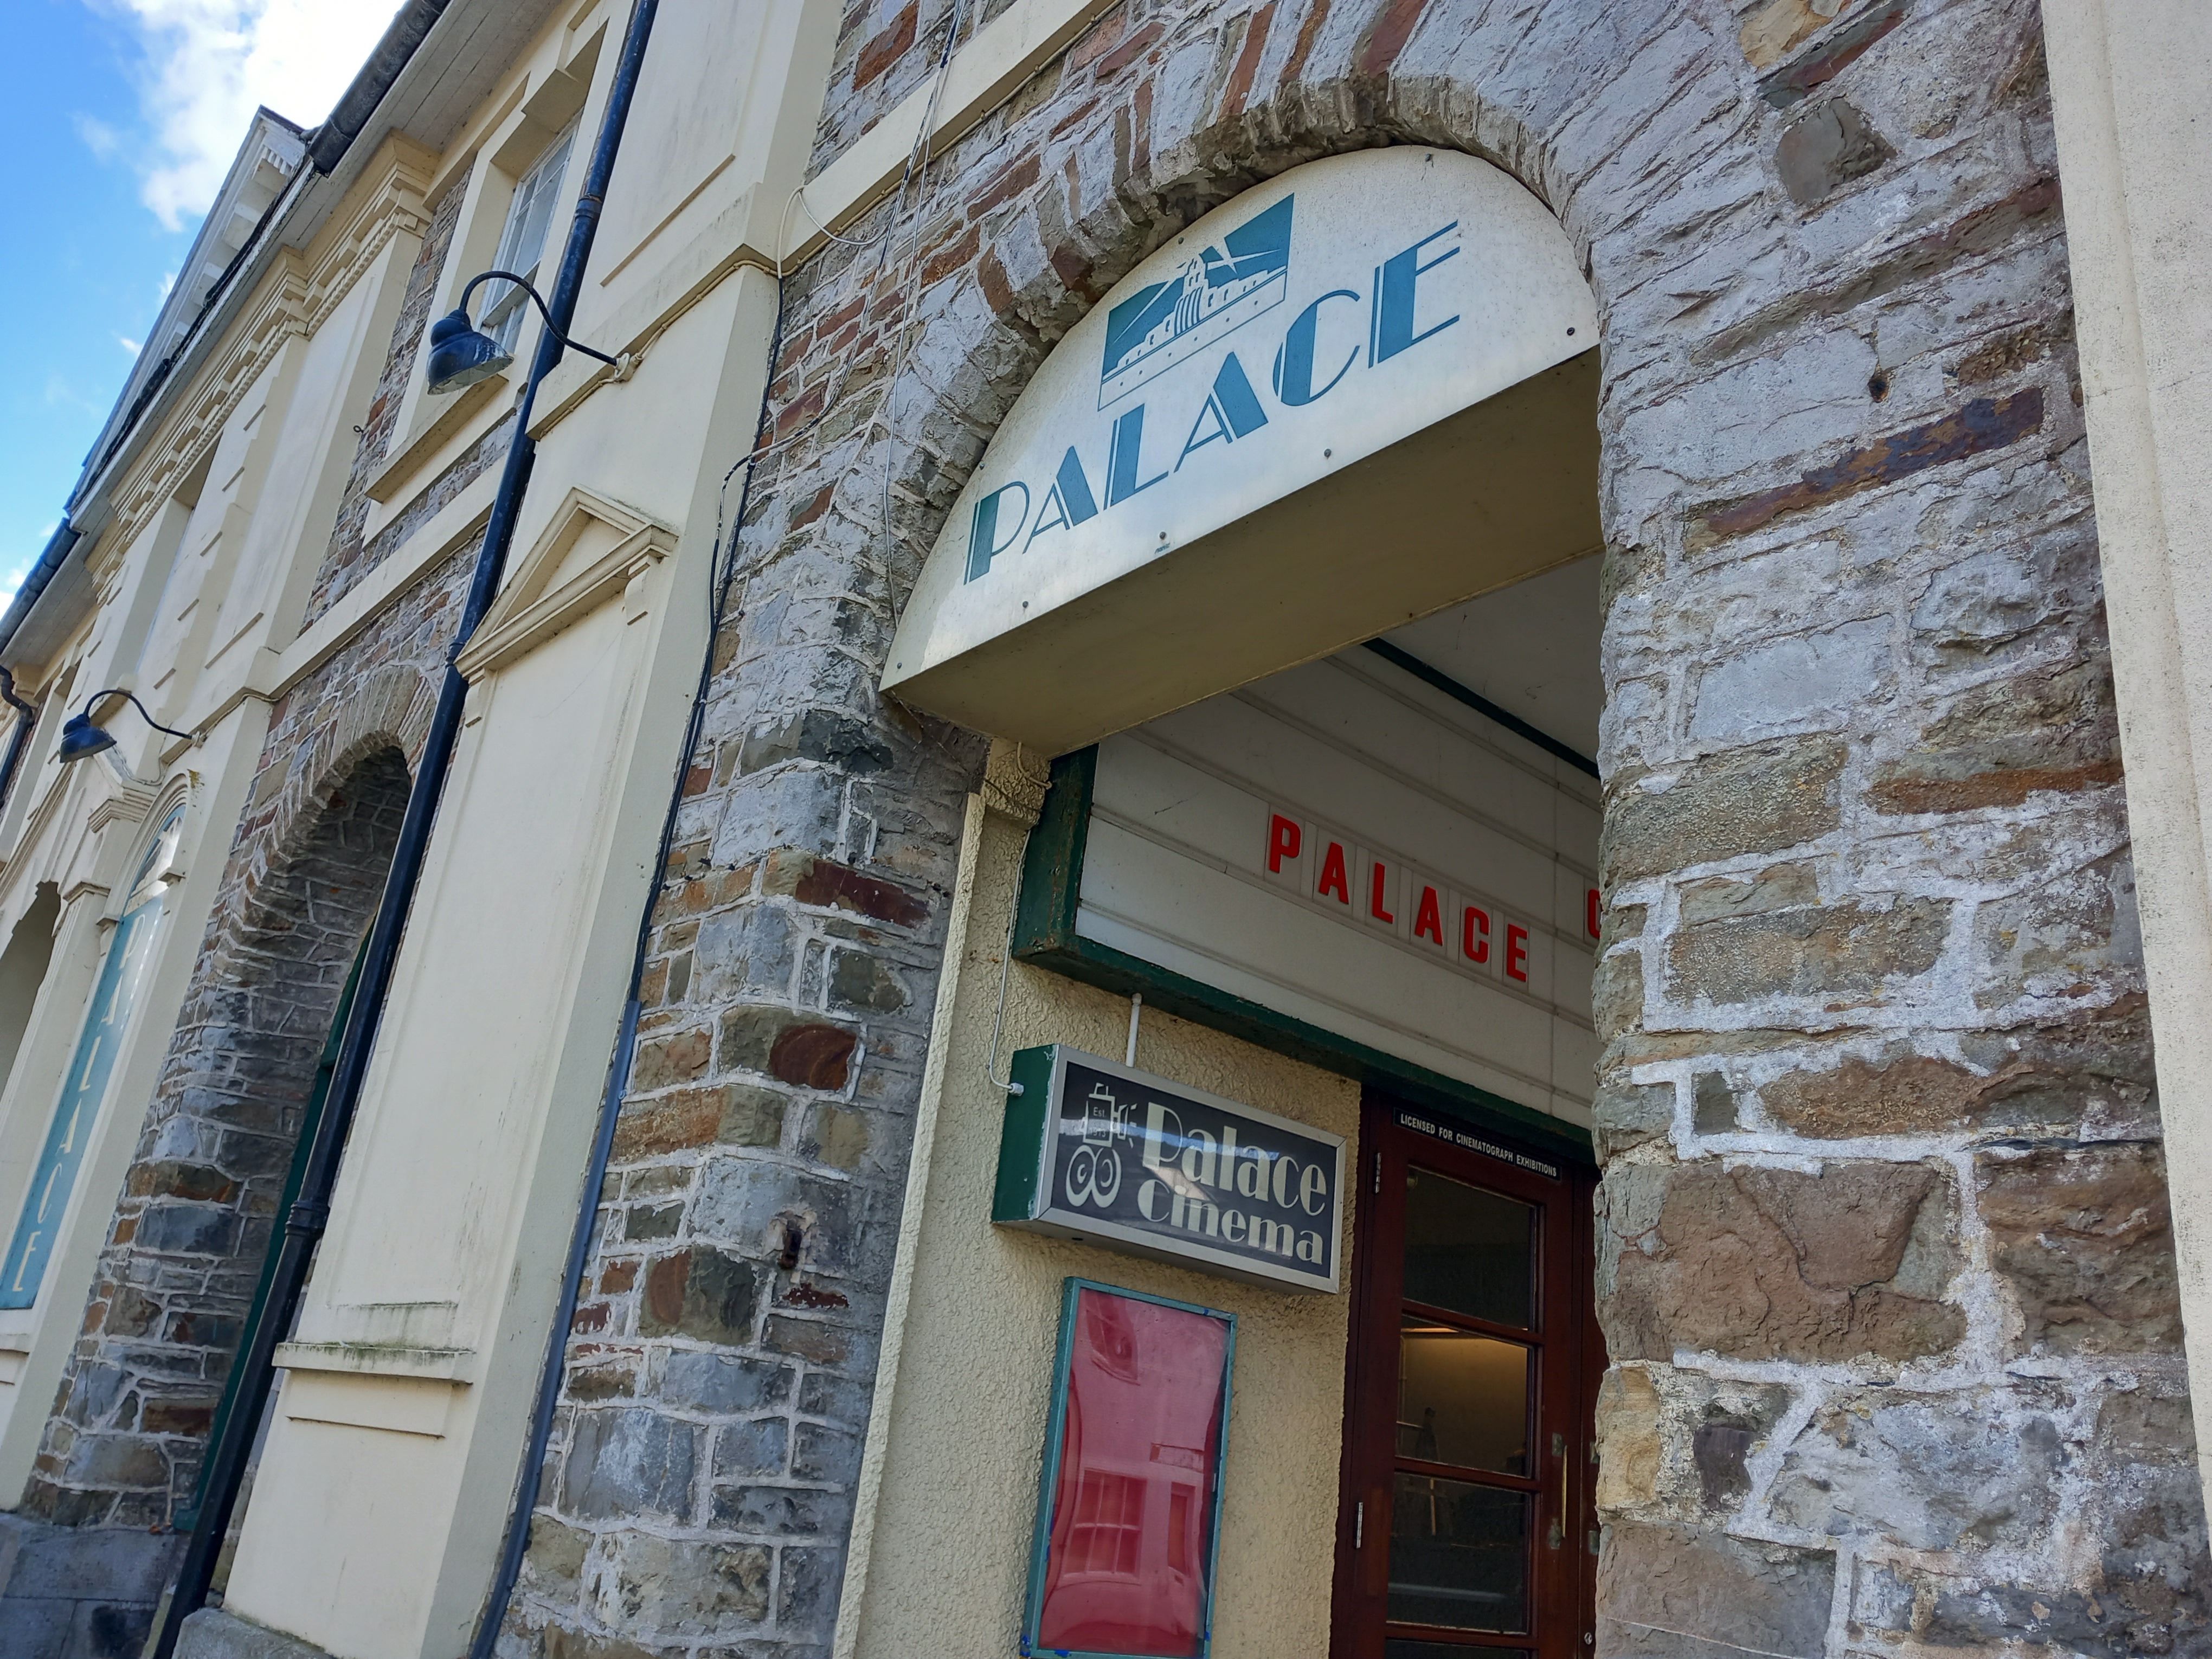 Haverfordwest Palace Theatre